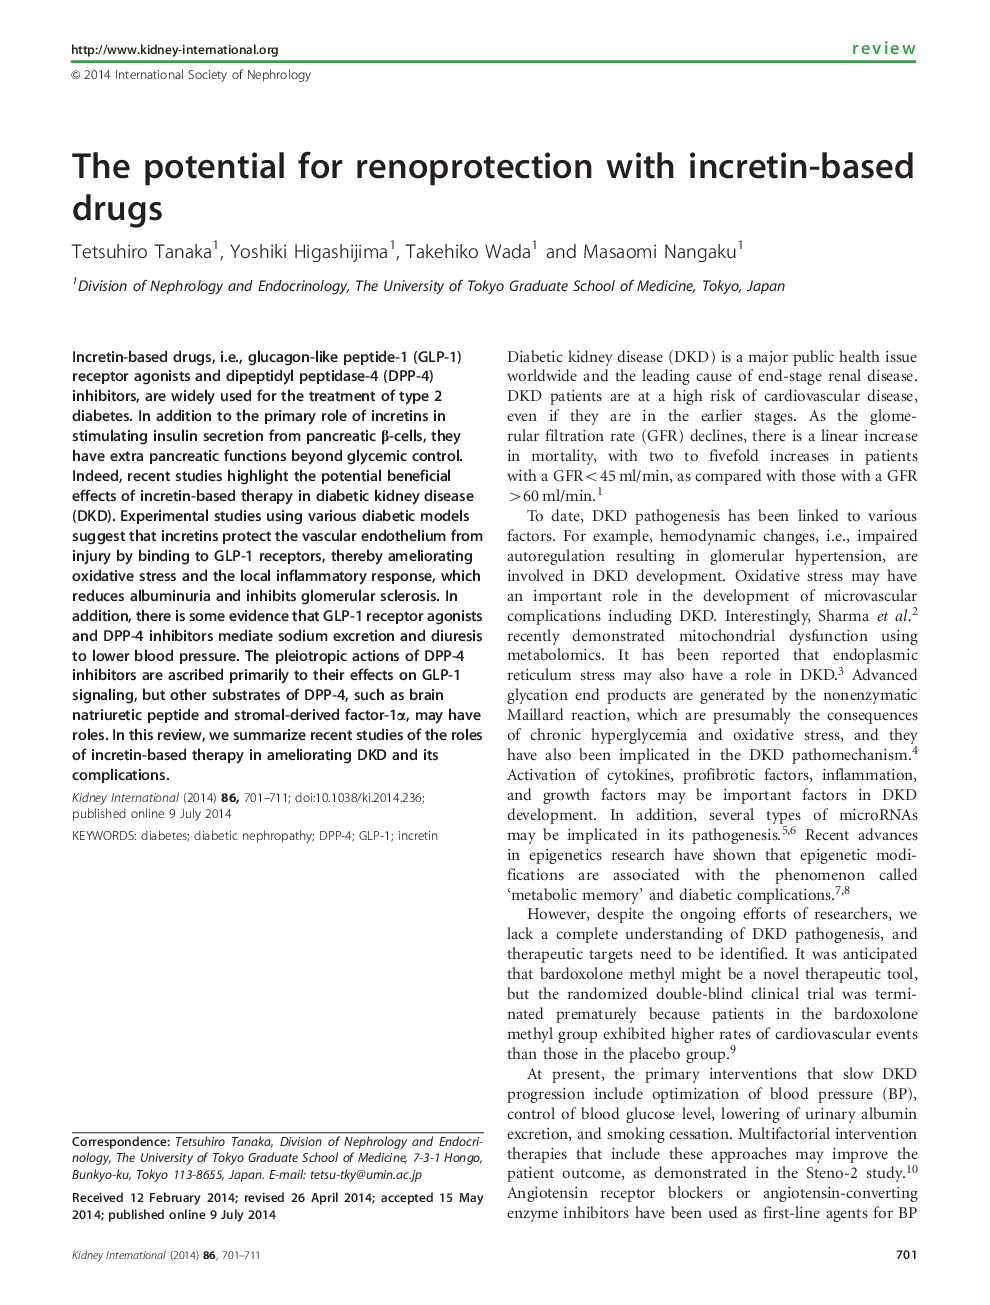 The potential for renoprotection with incretin-based drugs